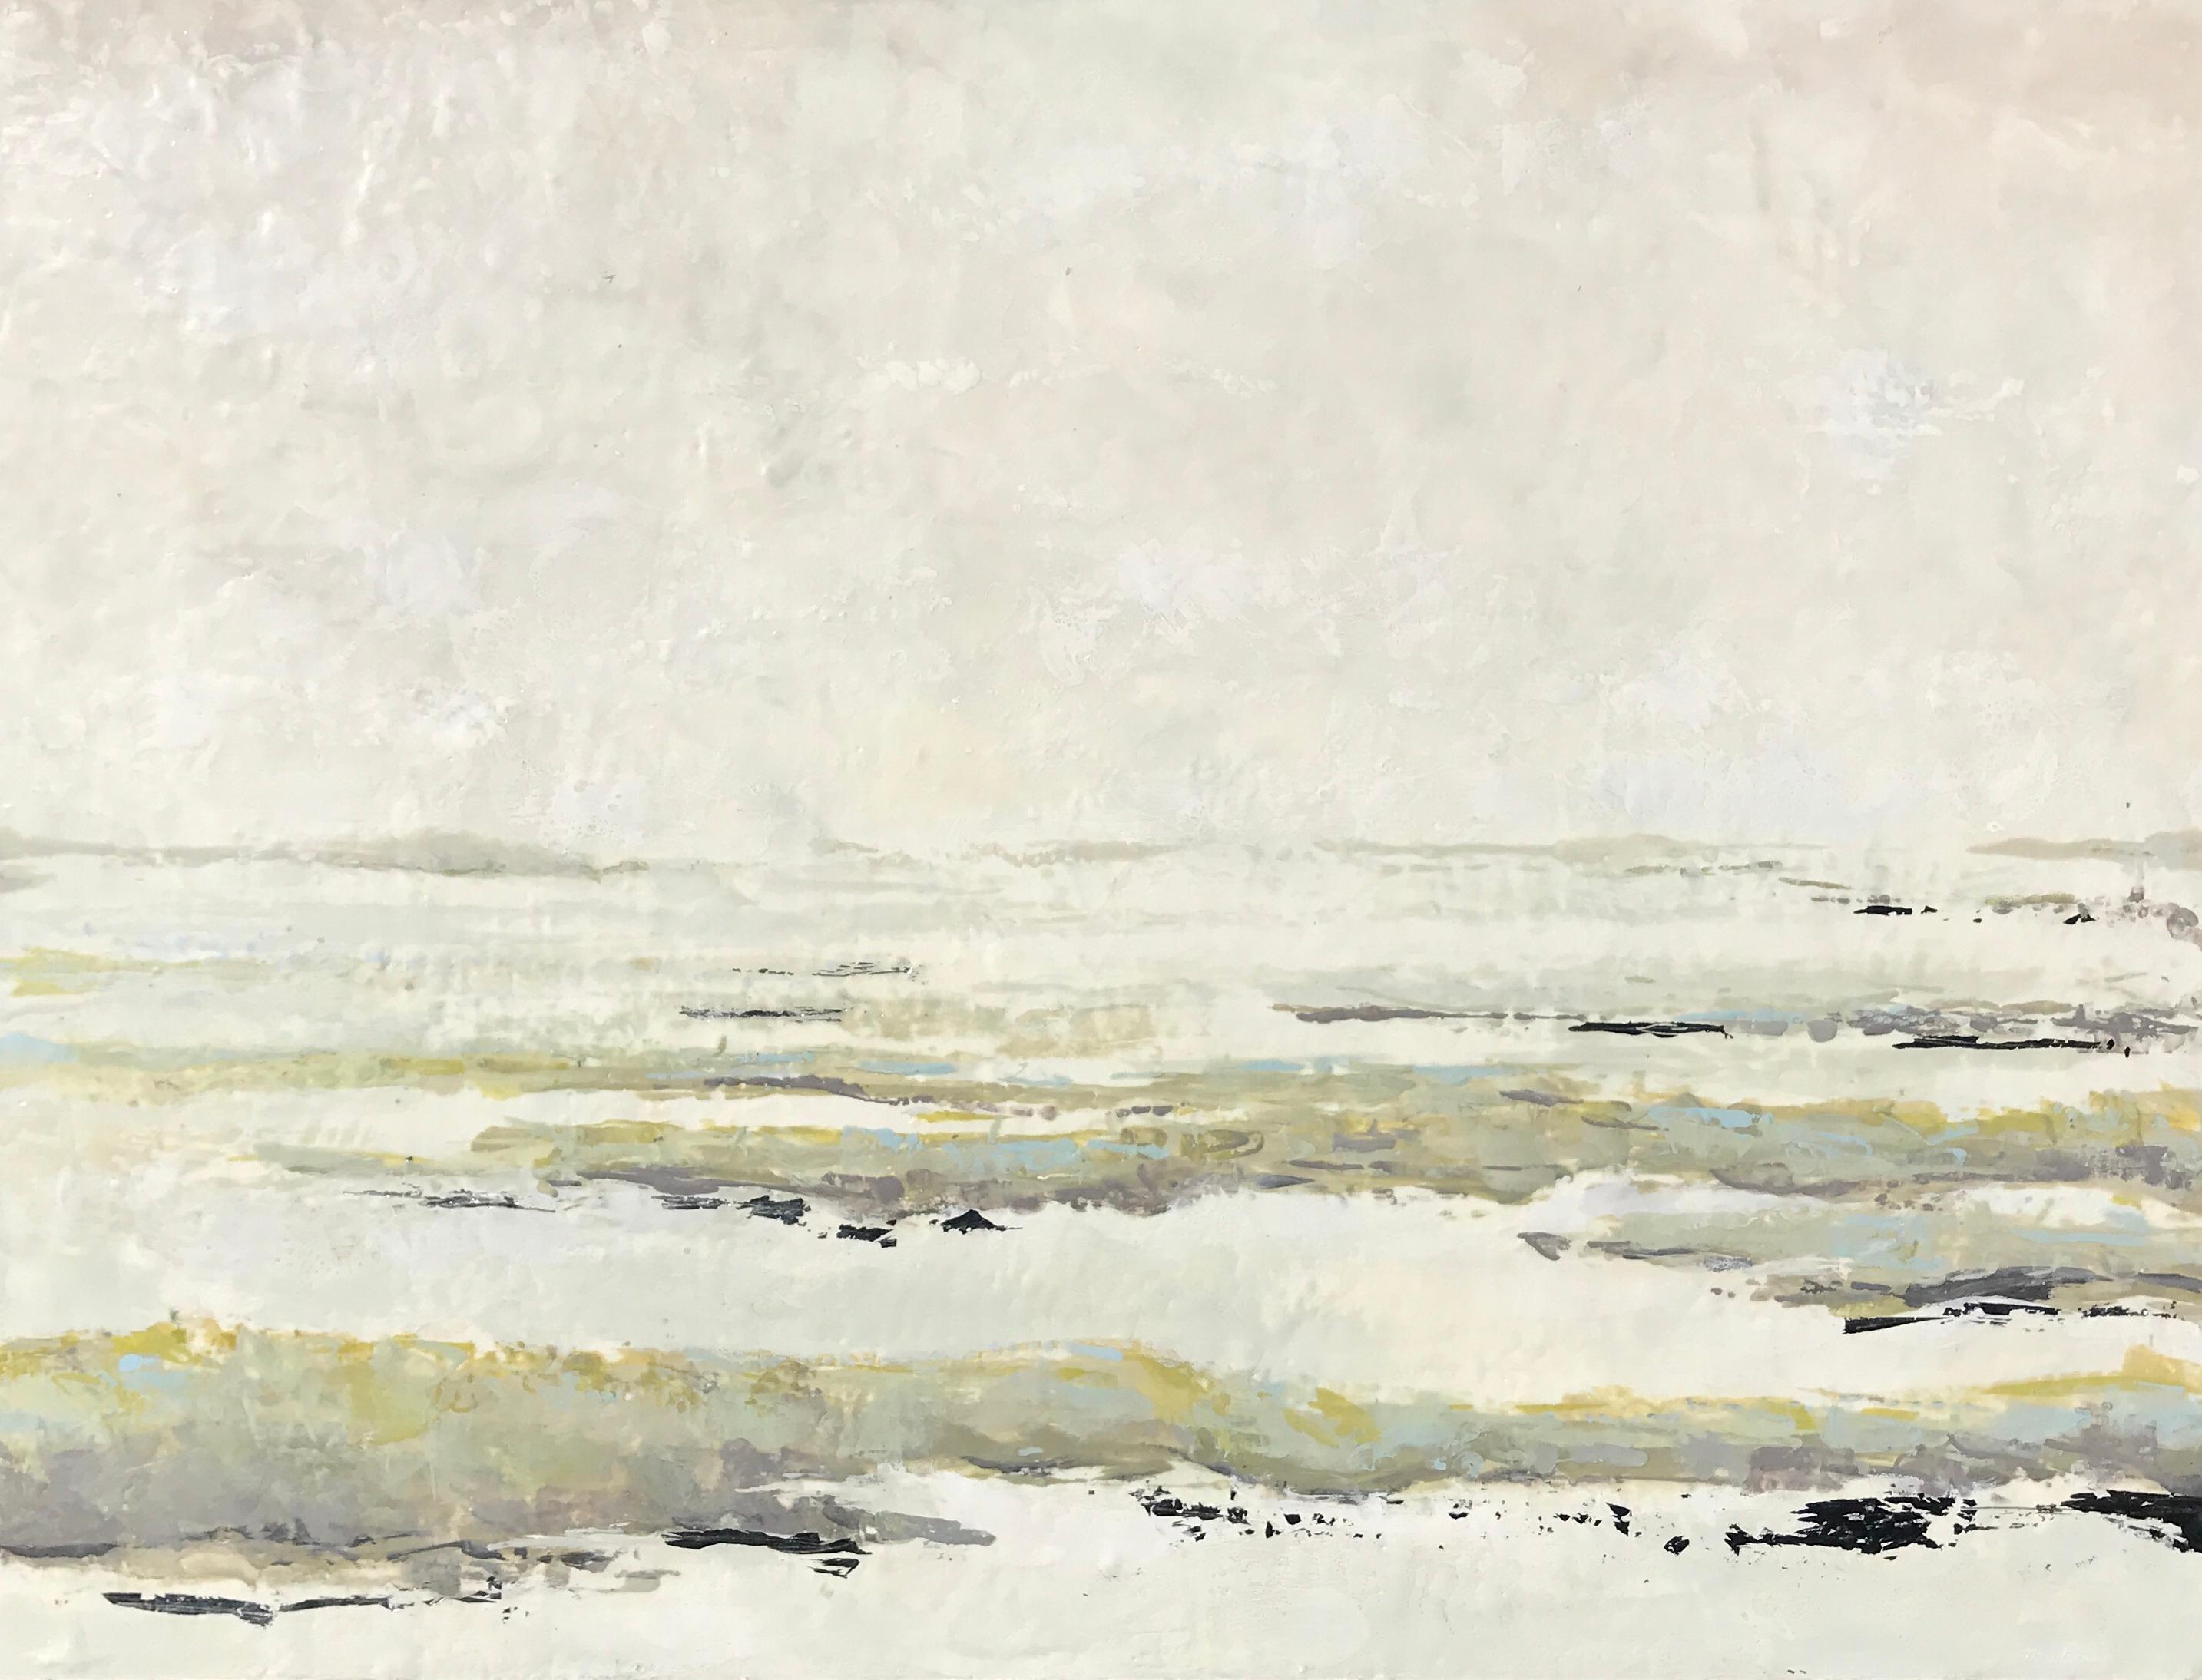 'Marshlands' is a large framed horizontal abstract encaustic and silver leaf on board landscape painting created by American artist Maureen Naughton in 2018. Featuring a soft palette mostly made of white, grey, green, light blue and black colors,